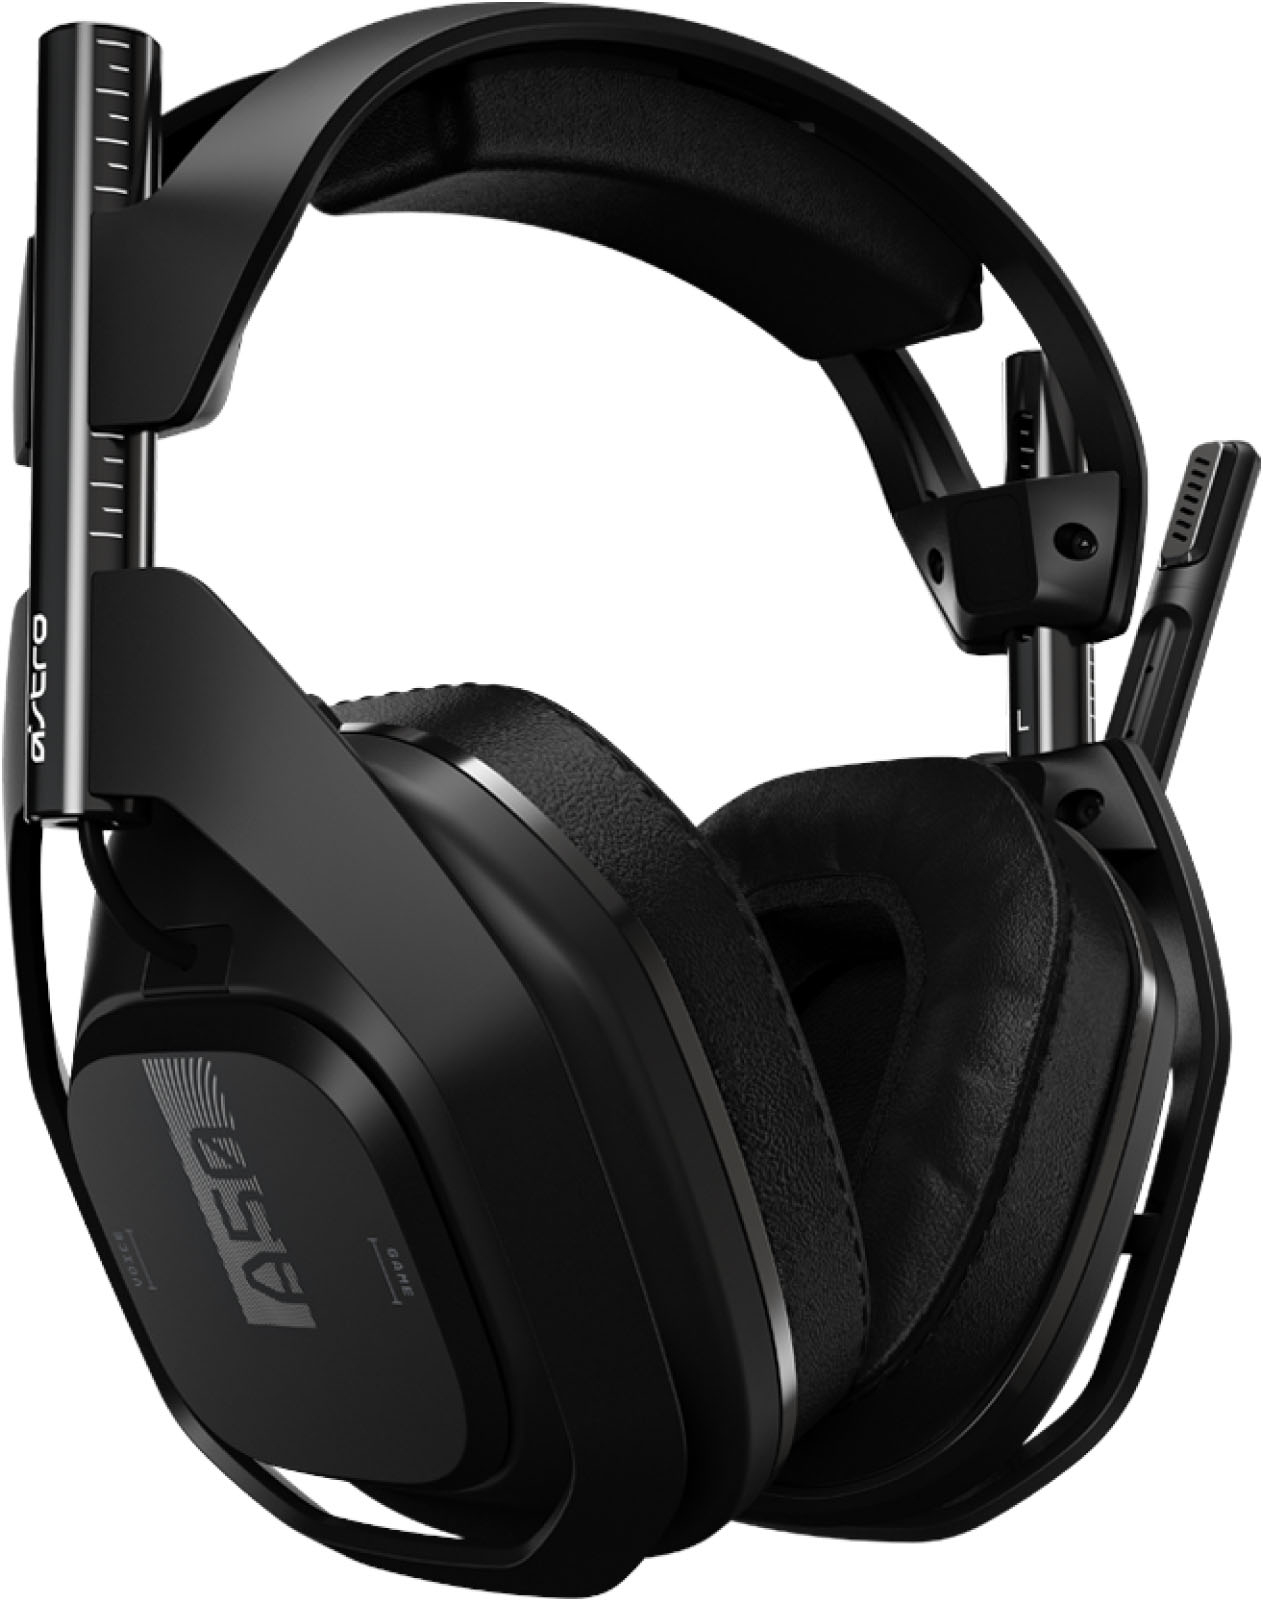 Astro Gaming A50 Wireless Dolby Gaming Headset - Black/Blue - PlayStation 4  + PlayStation 5 + PC (Gen 3) (Renewed)